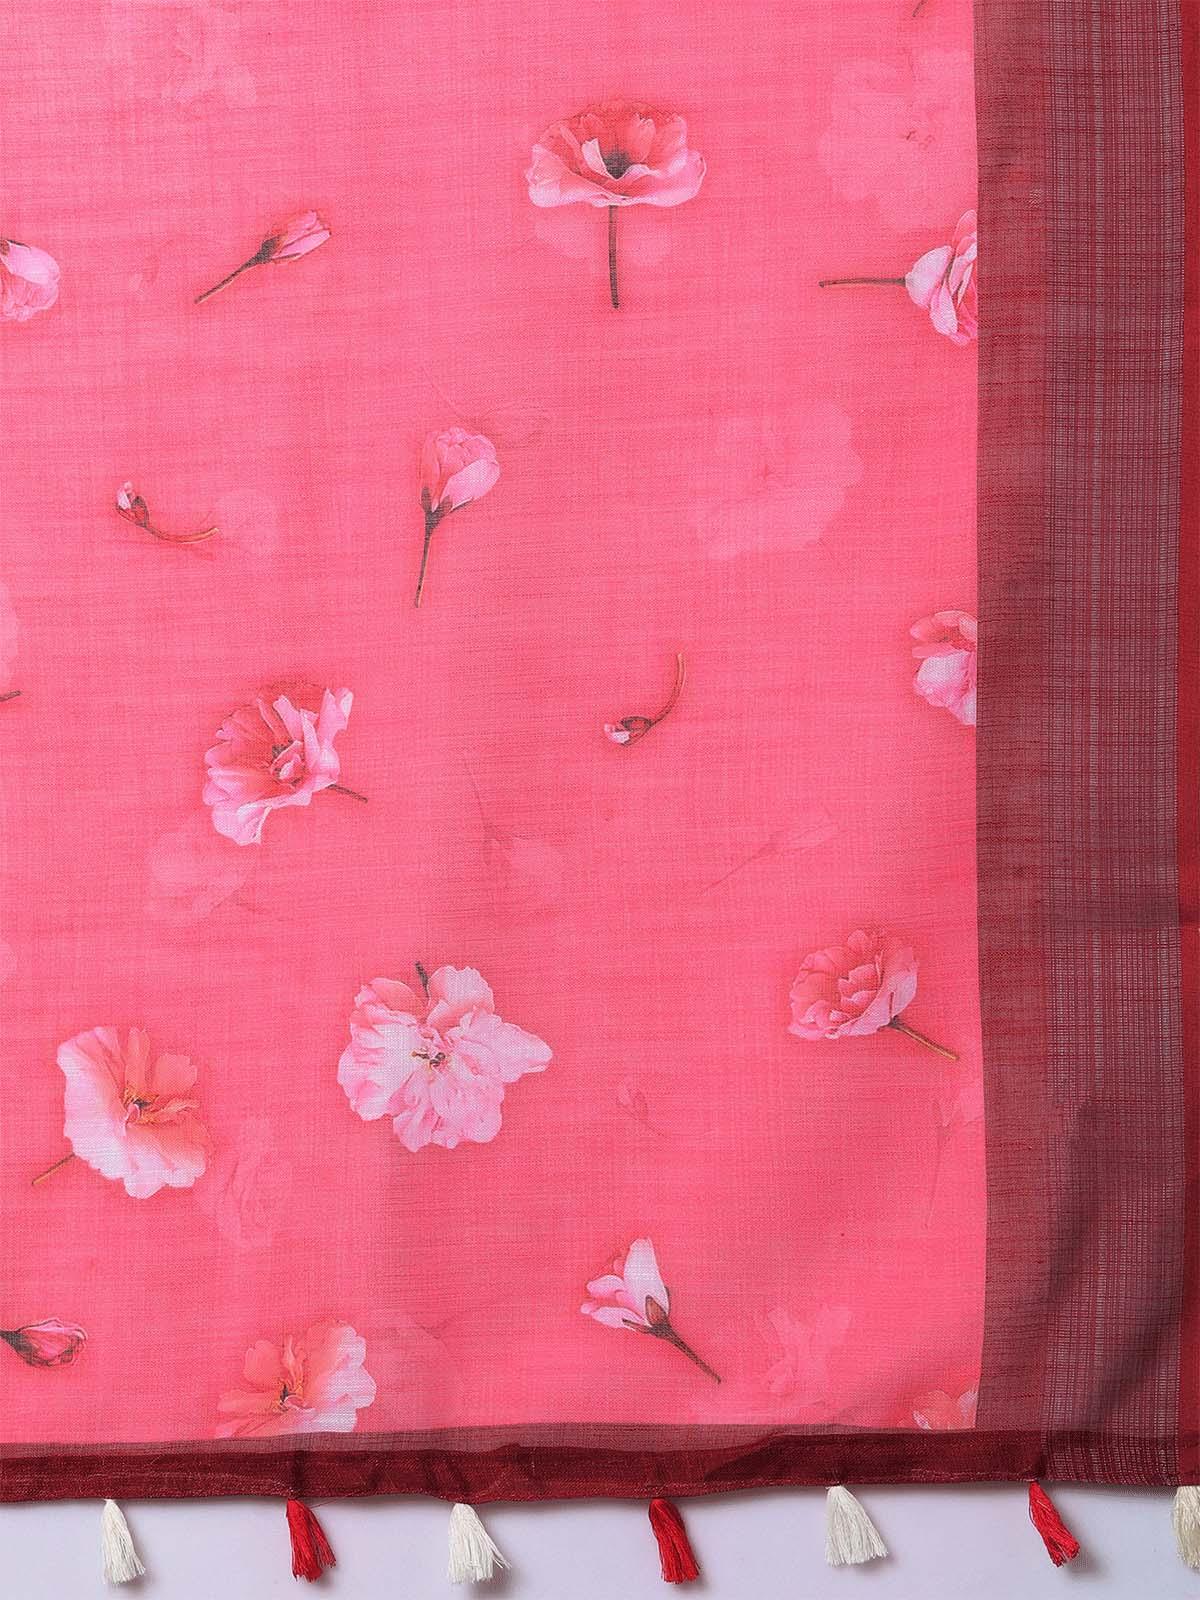 Women's Pink Casual Linen Printed Saree With Unstitched Blouse - Odette